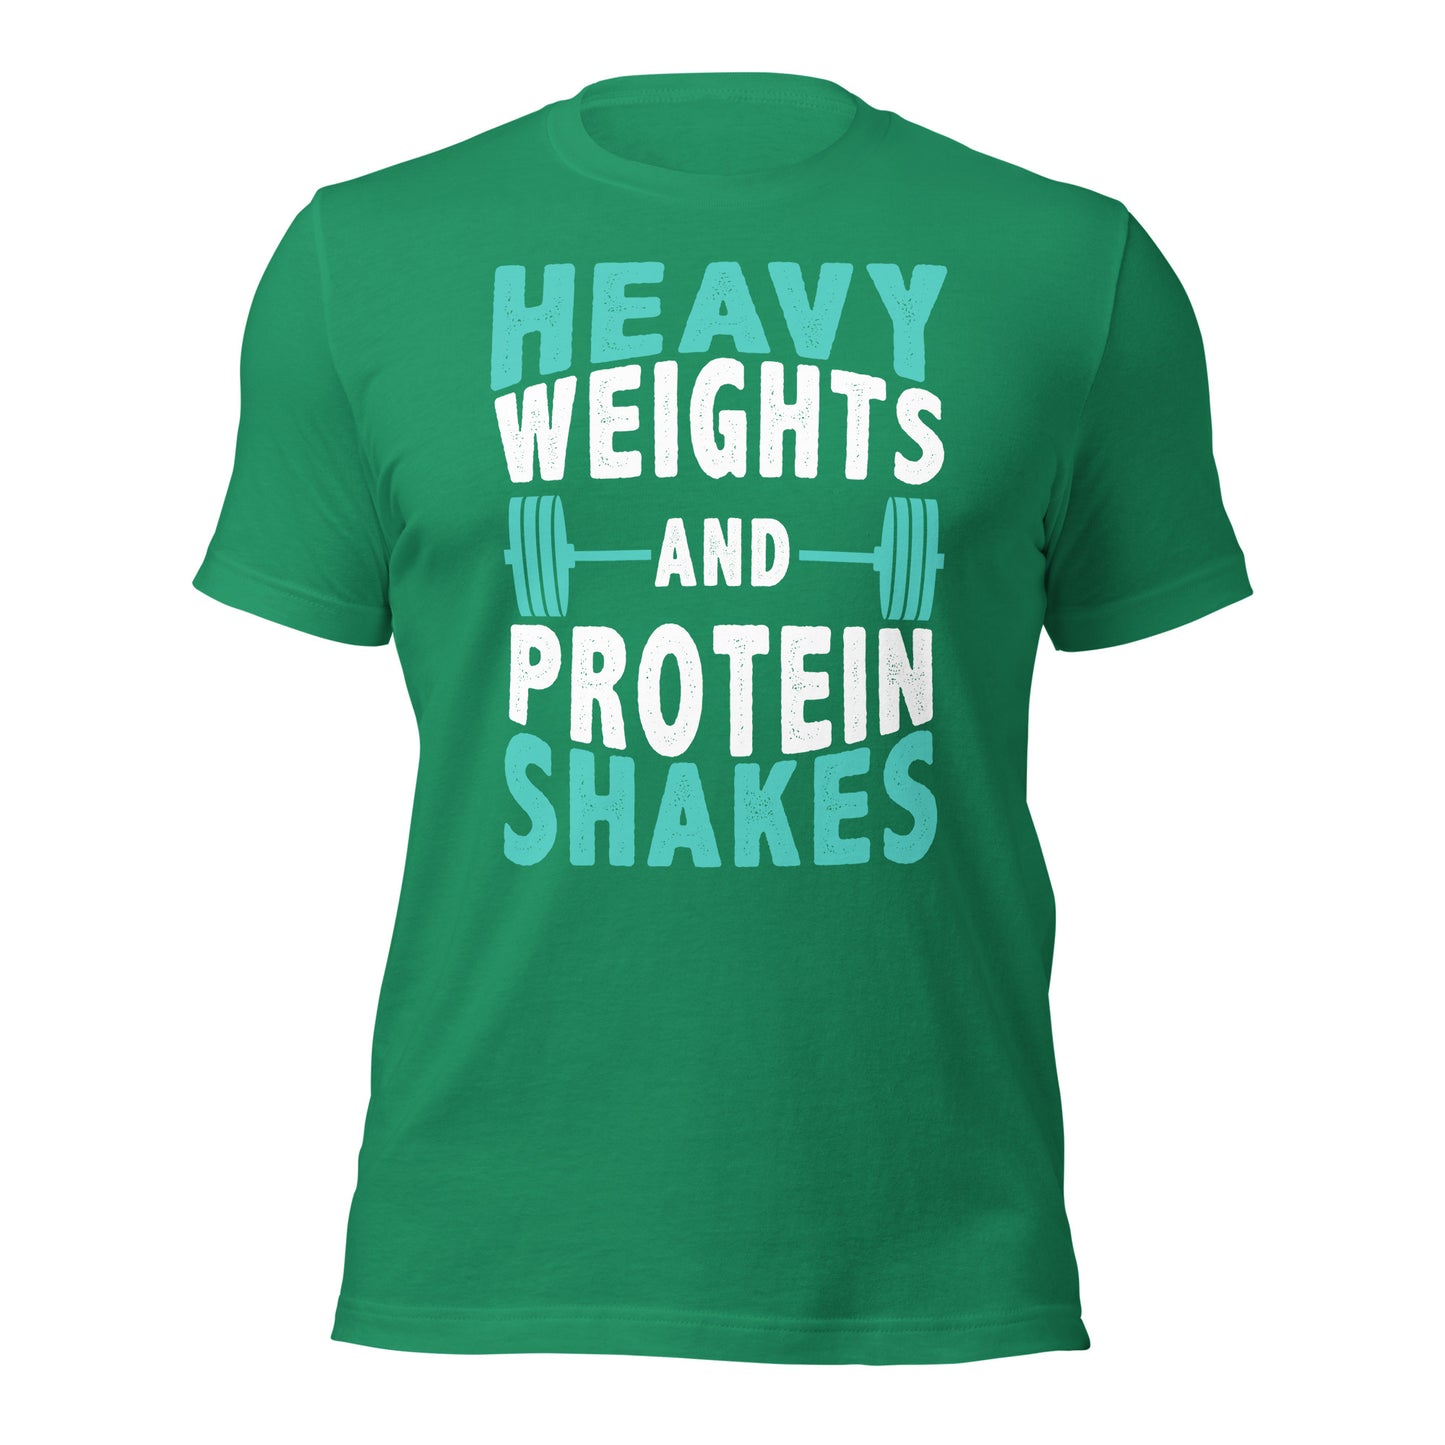 Heavy weights protein shakes tee green